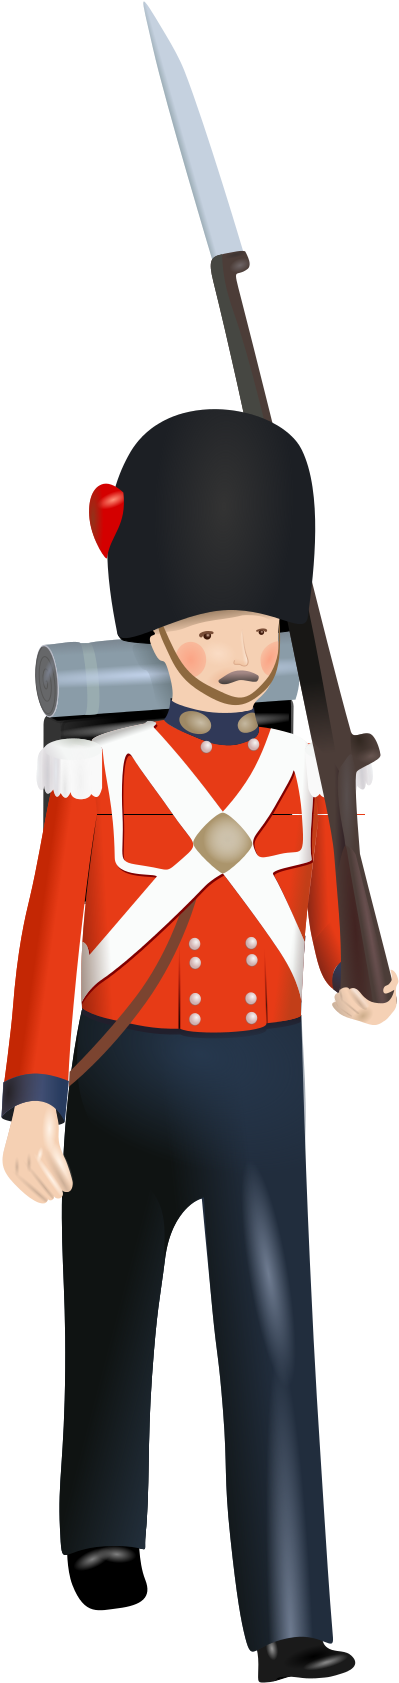 File - Toy Soldier - Svg - Toy Soldier Icon (450x1700)